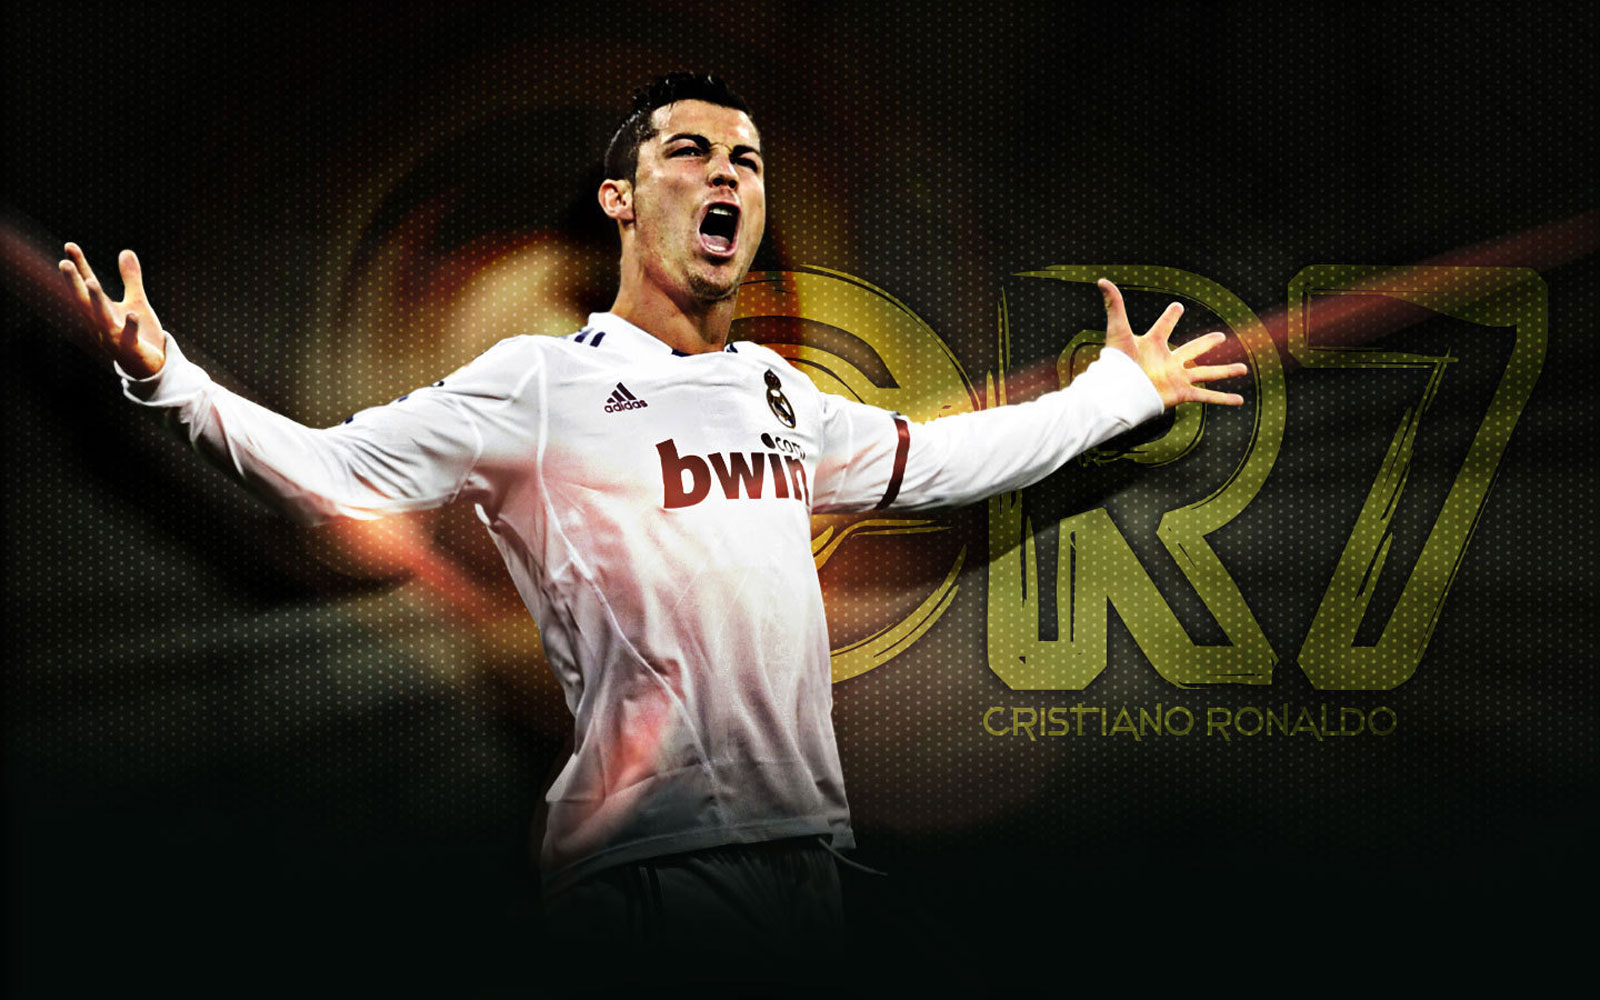 Real Madrid Pictures Players And Videos: Real Madrid Wallpaper HD - Best Wallpapers ...1600 x 1000